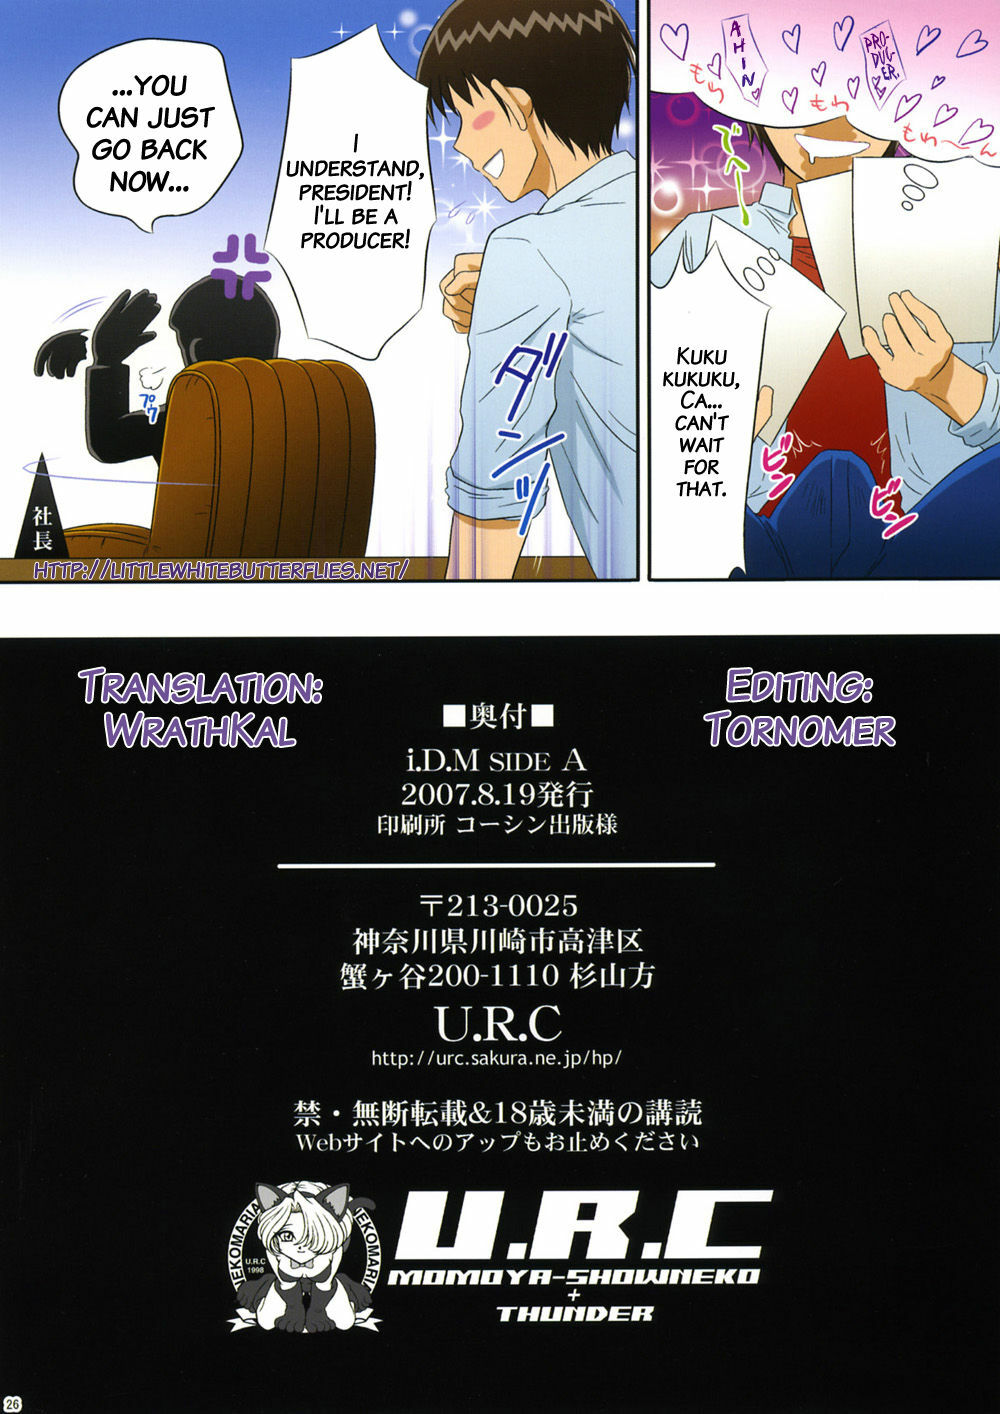 (C72) [U.R.C (MOMOYA SHOW-NEKO)] i.D.M SIDE A (THE iDOLM@STER) [English] =Wrathkal+Torn= page 25 full